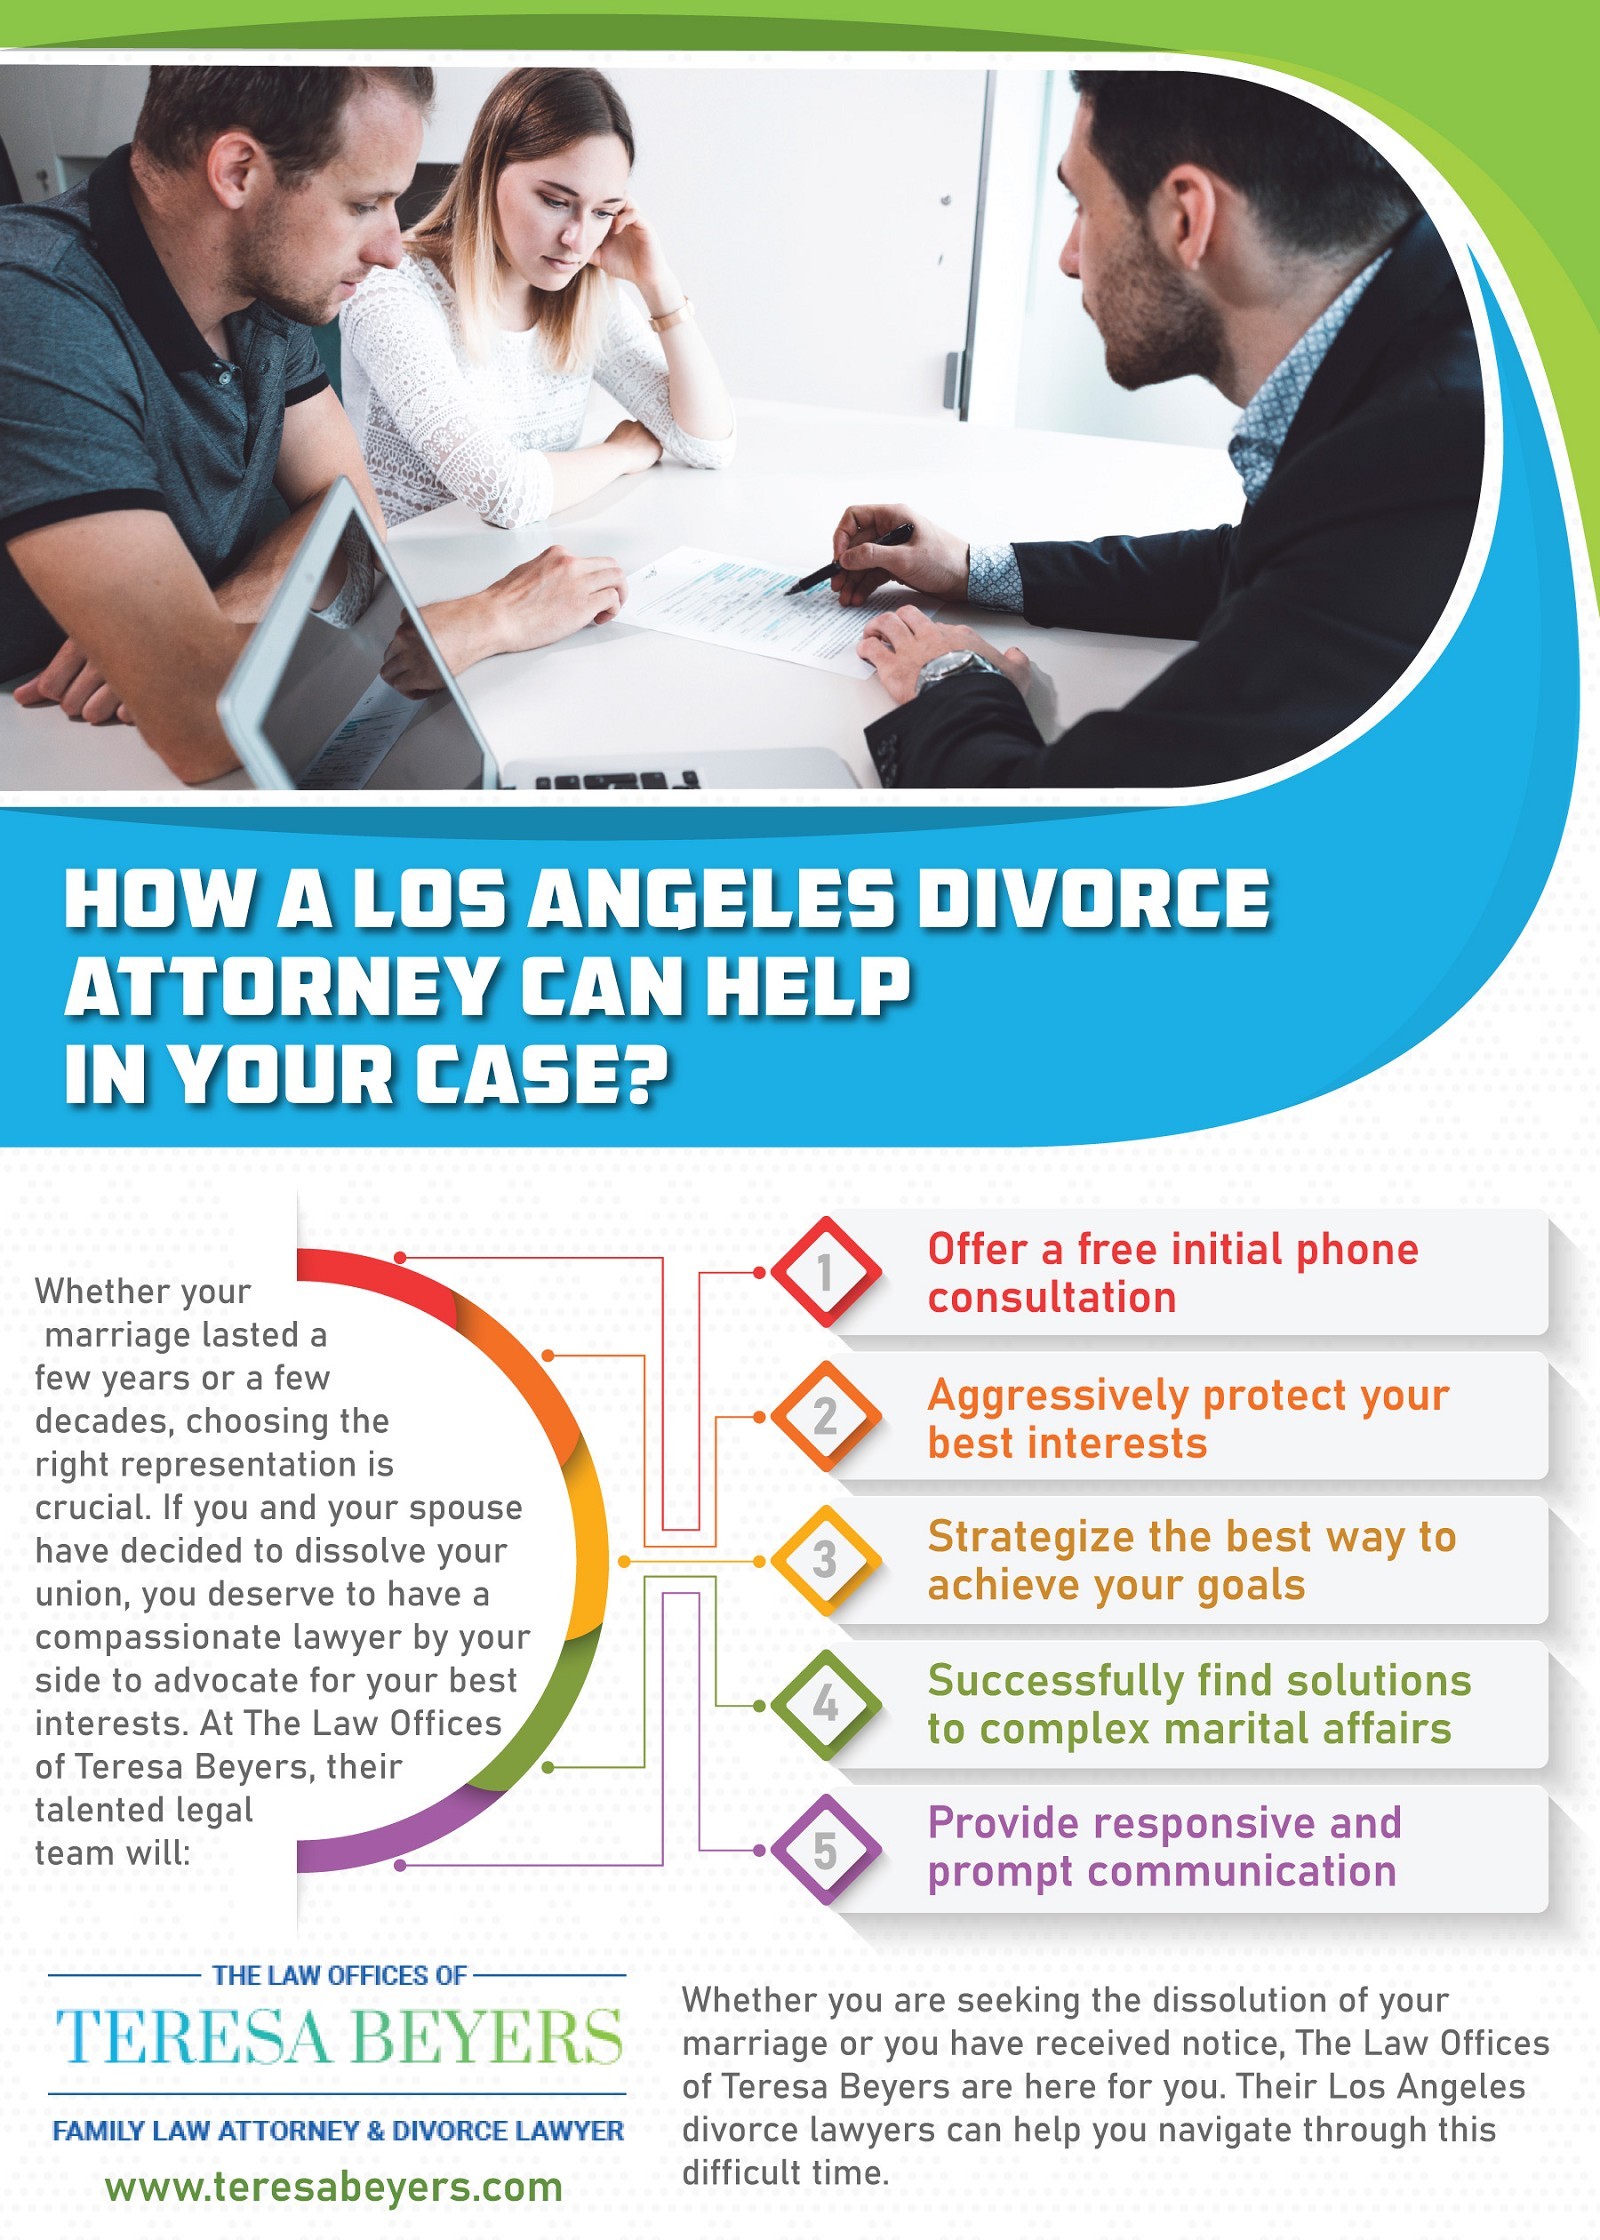 How A Los Angeles Divorce Attorney Can Help In Your Case?